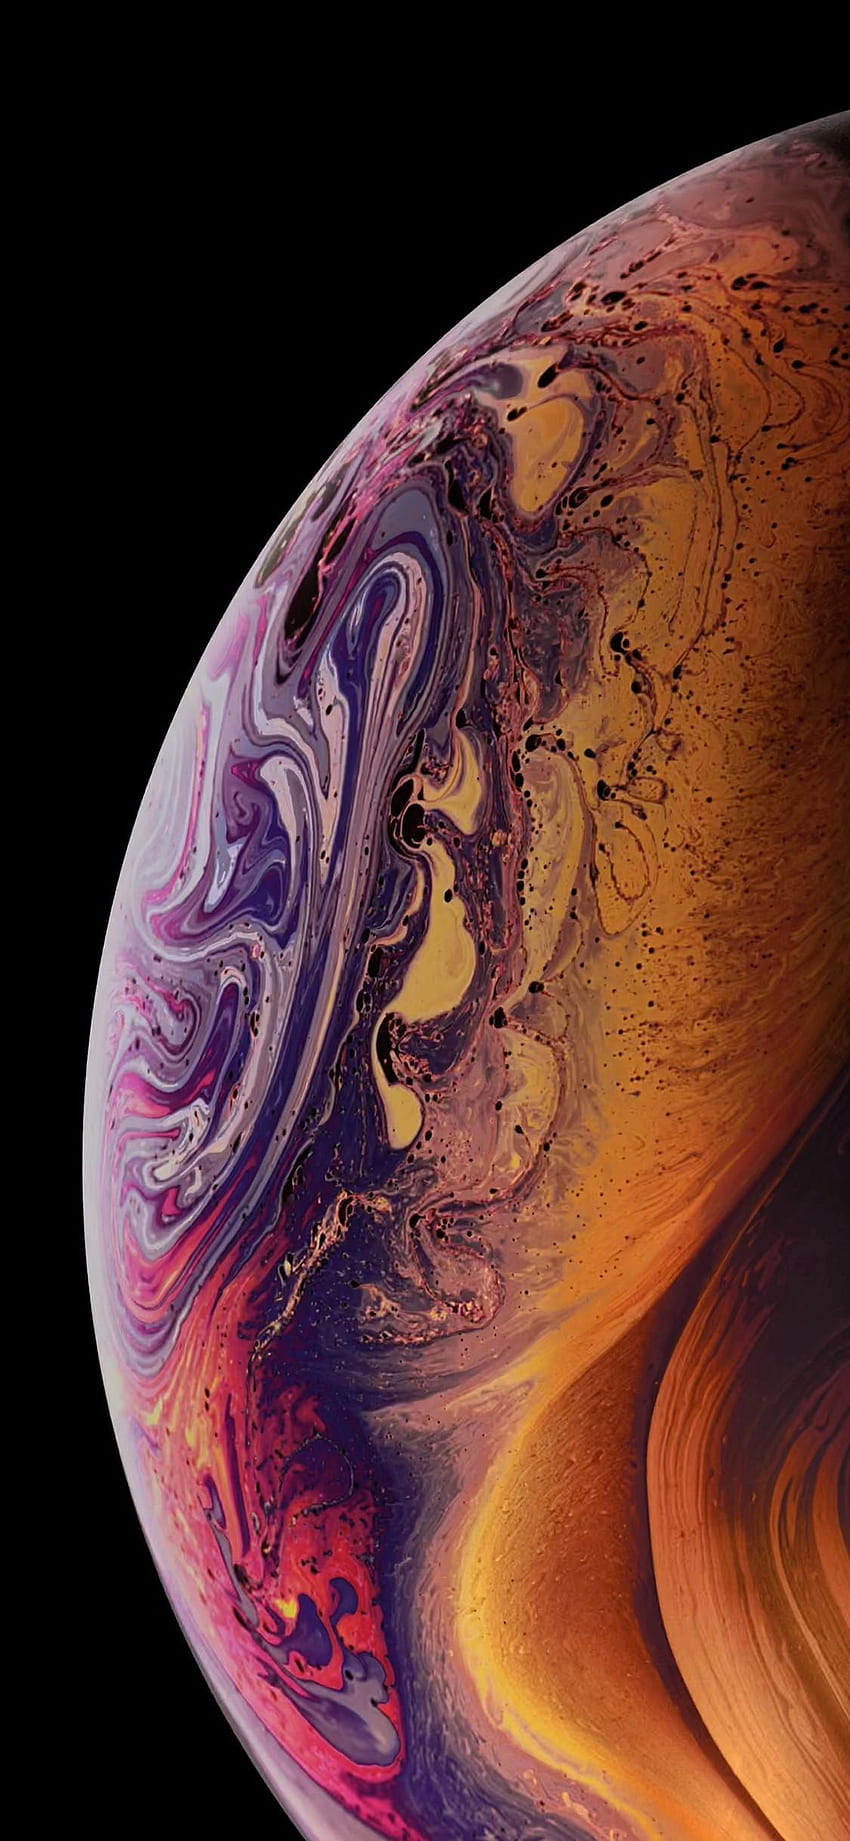 The magic iPhone wallpapers that make your dock and folders disappear are  back